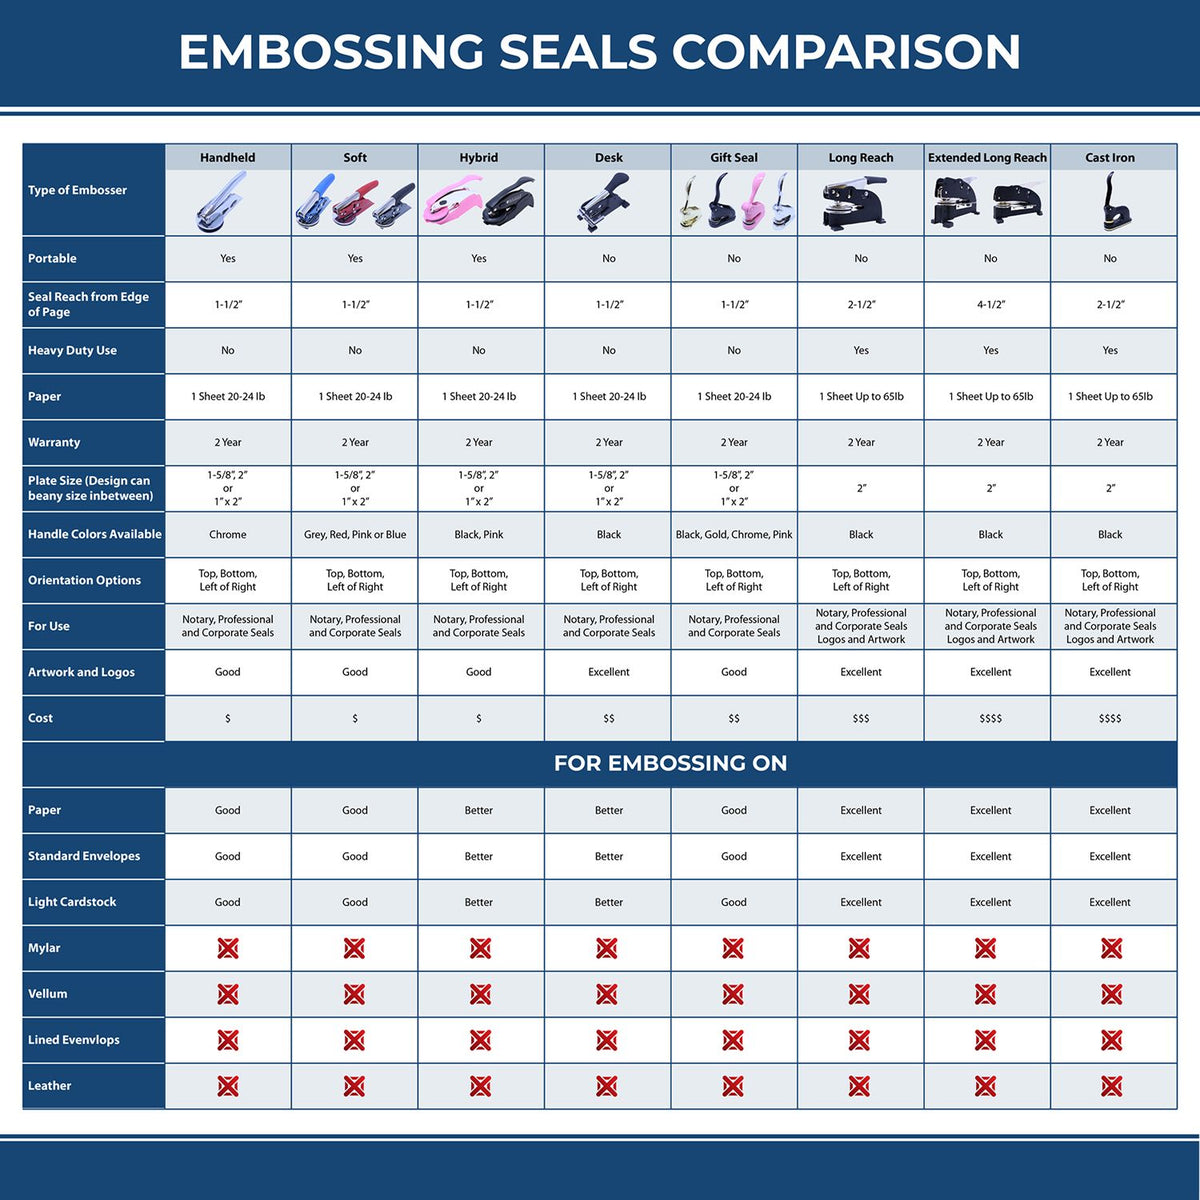 A comparison chart for the different types of mount models available for the Soft South Dakota Professional Engineer Seal.